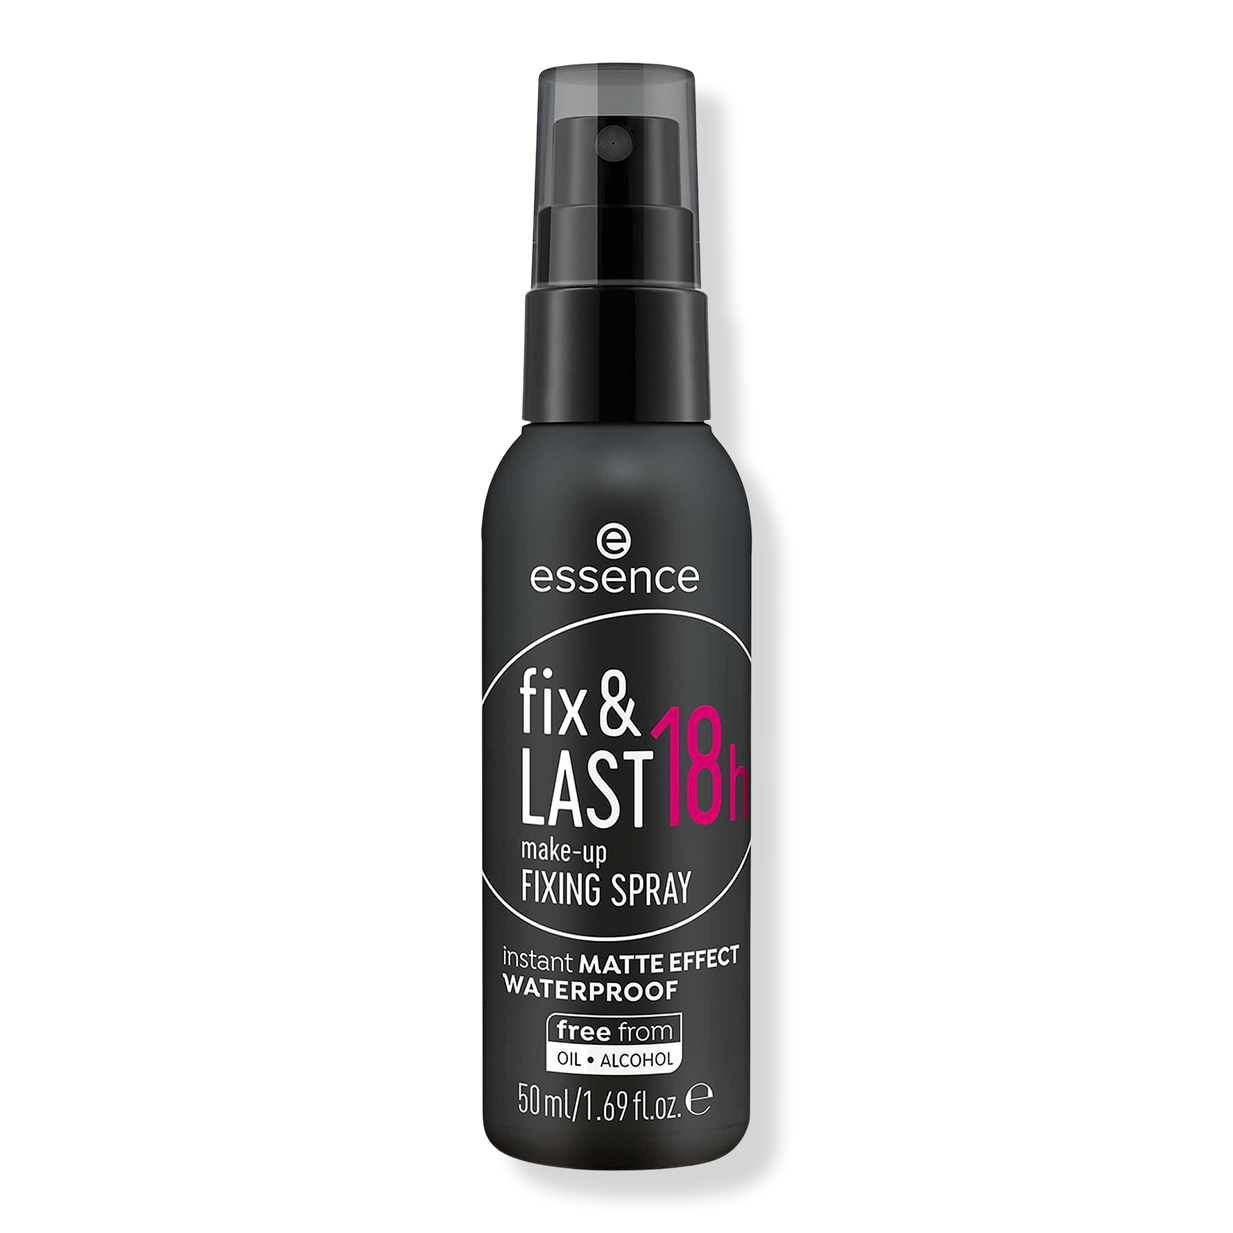 Up for Ever Mist & Fix Make-Up Setting Spray 1.01 fl. oz. Travel Size